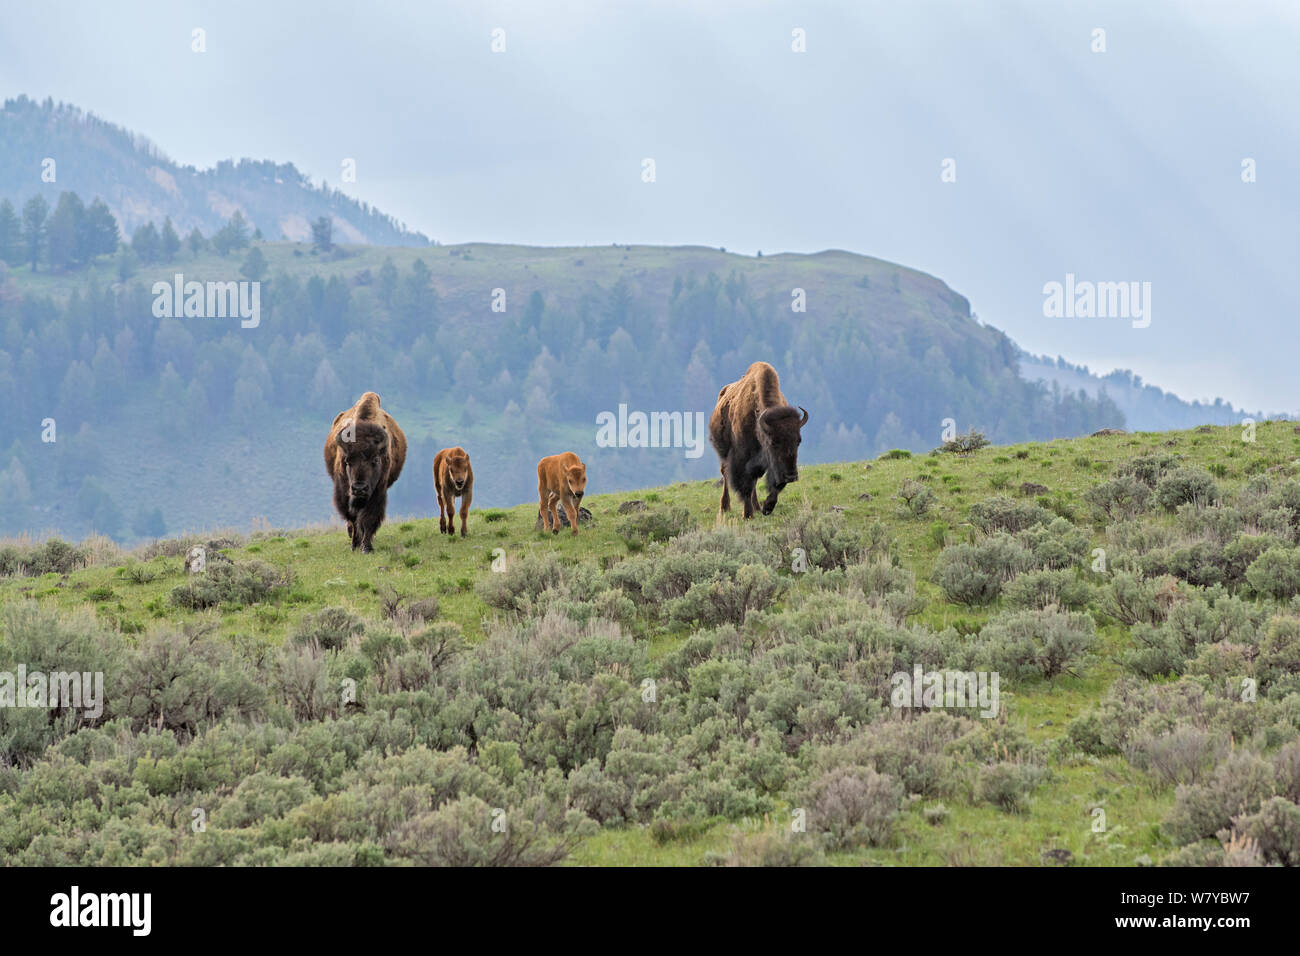 American Buffalo or Bison (Bison bison) two with two calves, Yellowstone National Park, Wyoming, USA, May Stock Photo